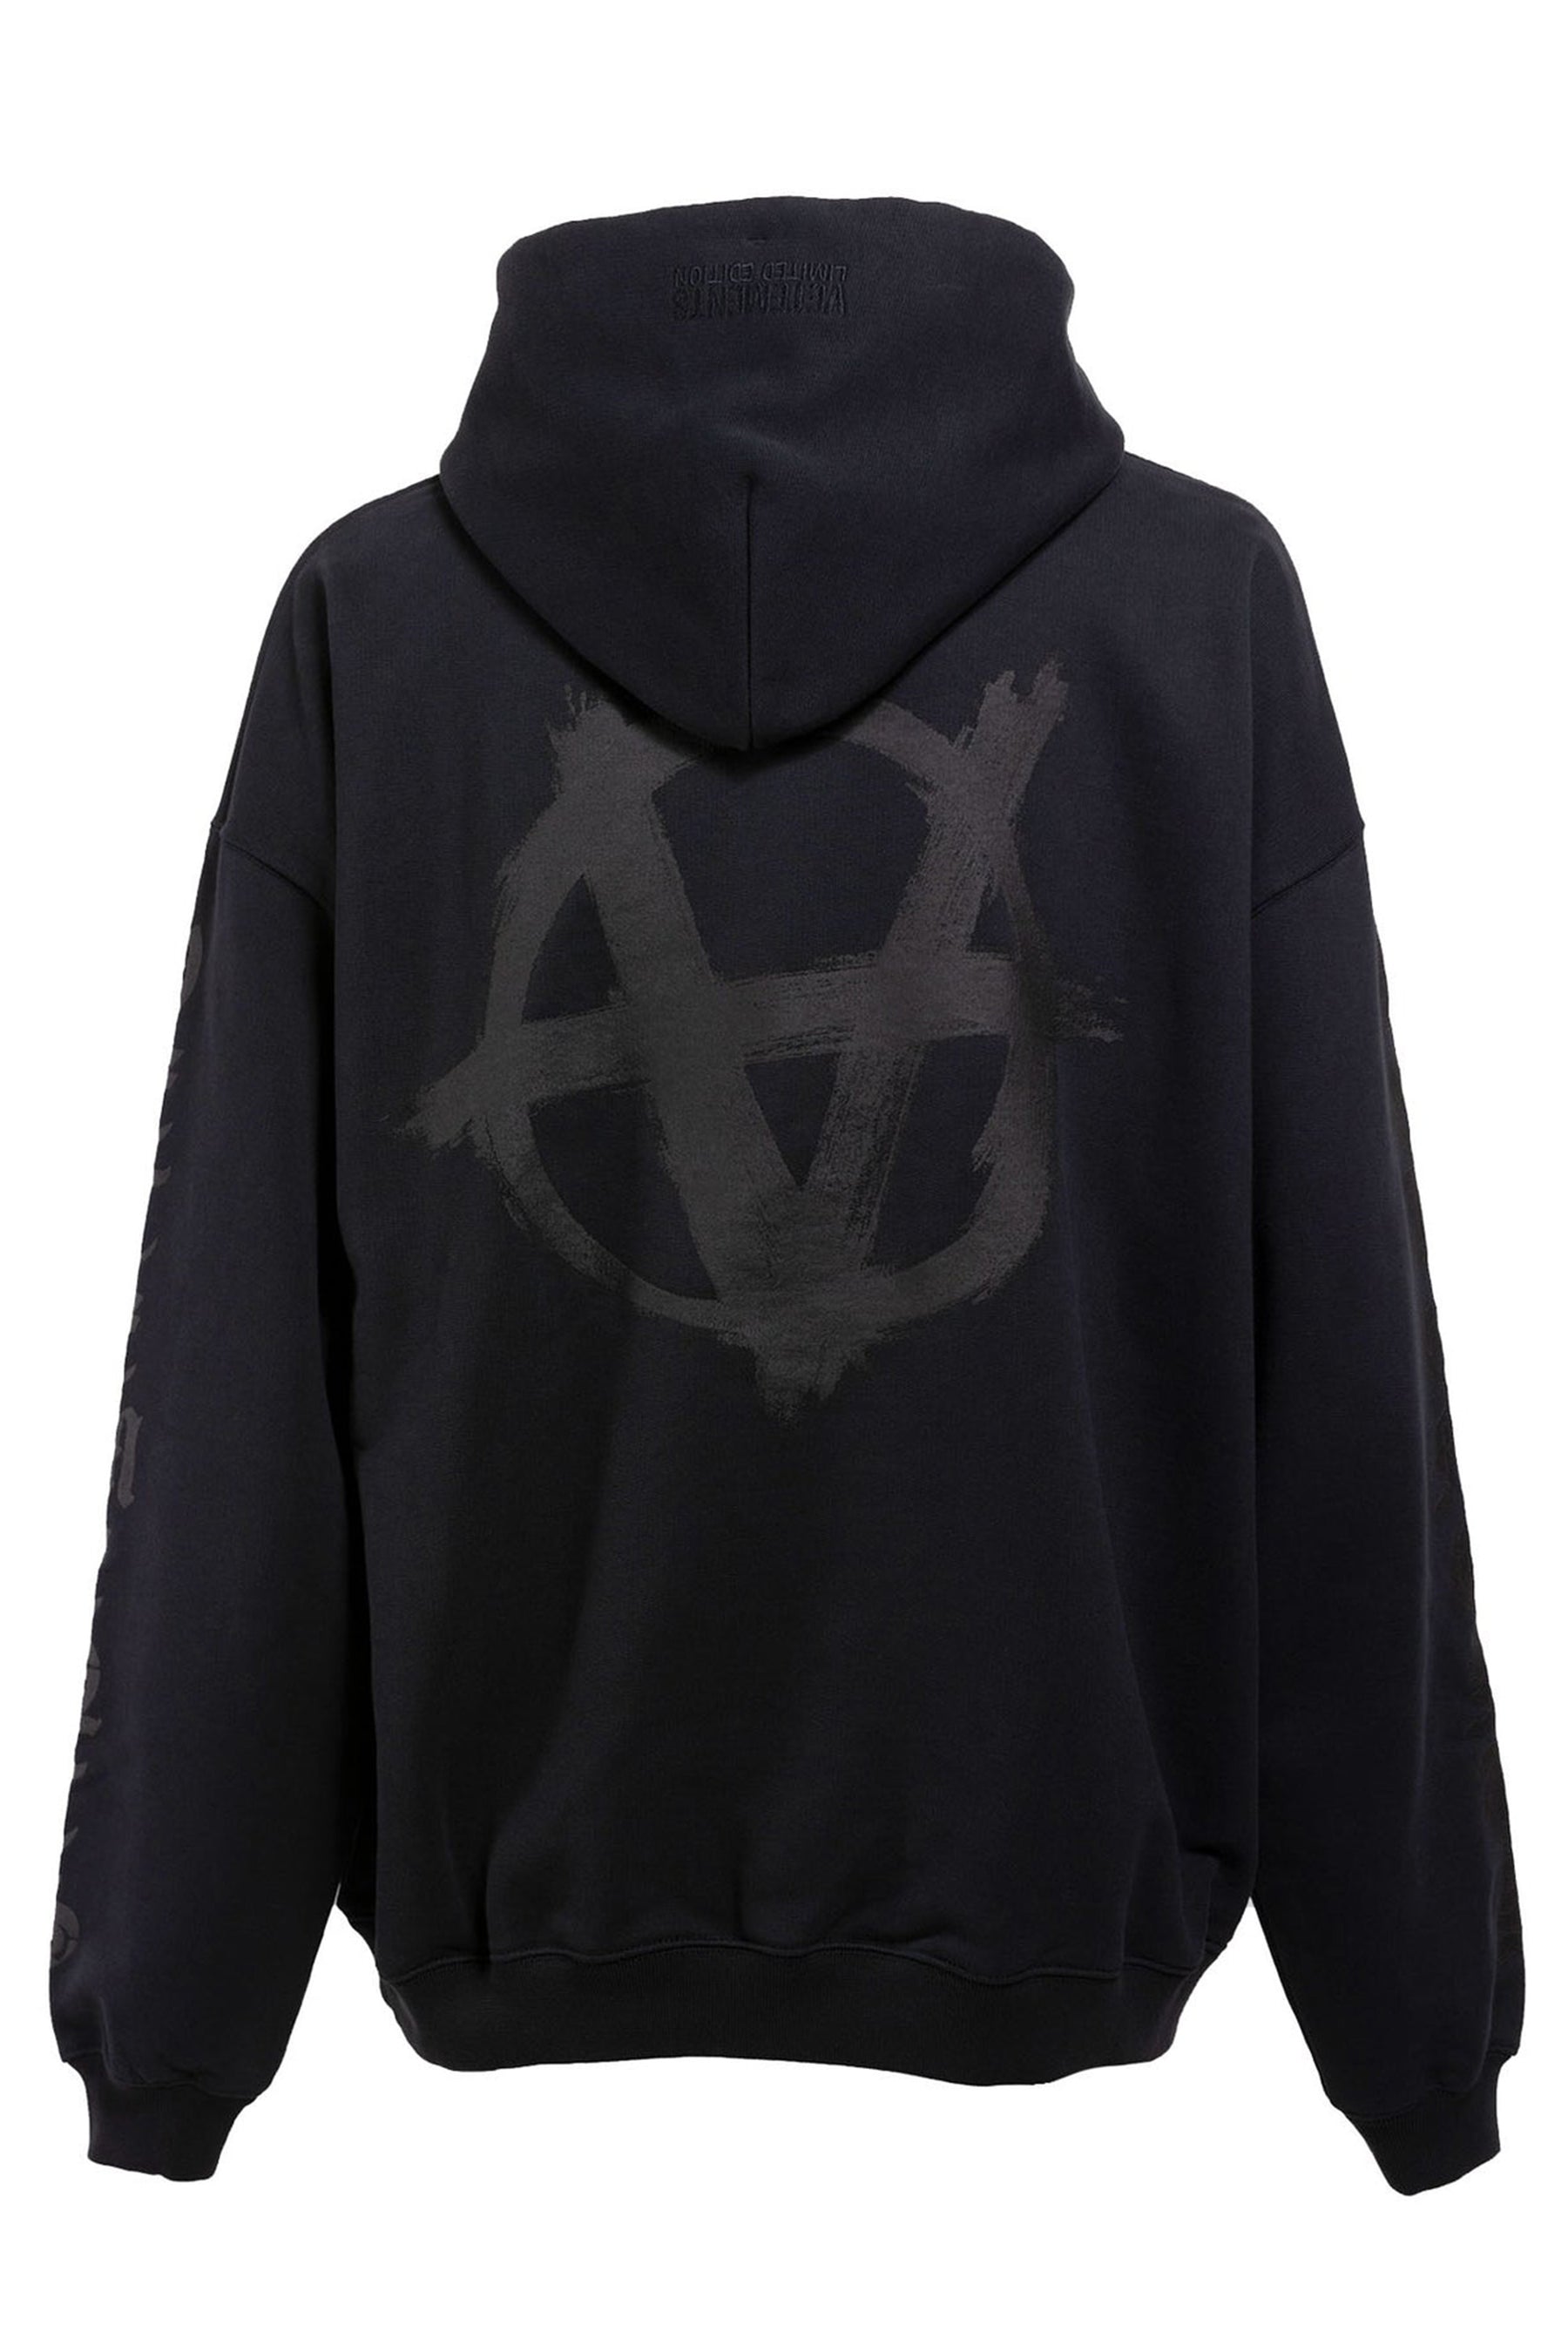 VETEMENTS 2022SS 「DOUBLE ANARCHY LOGO HOODIE」 アナーキーロゴ